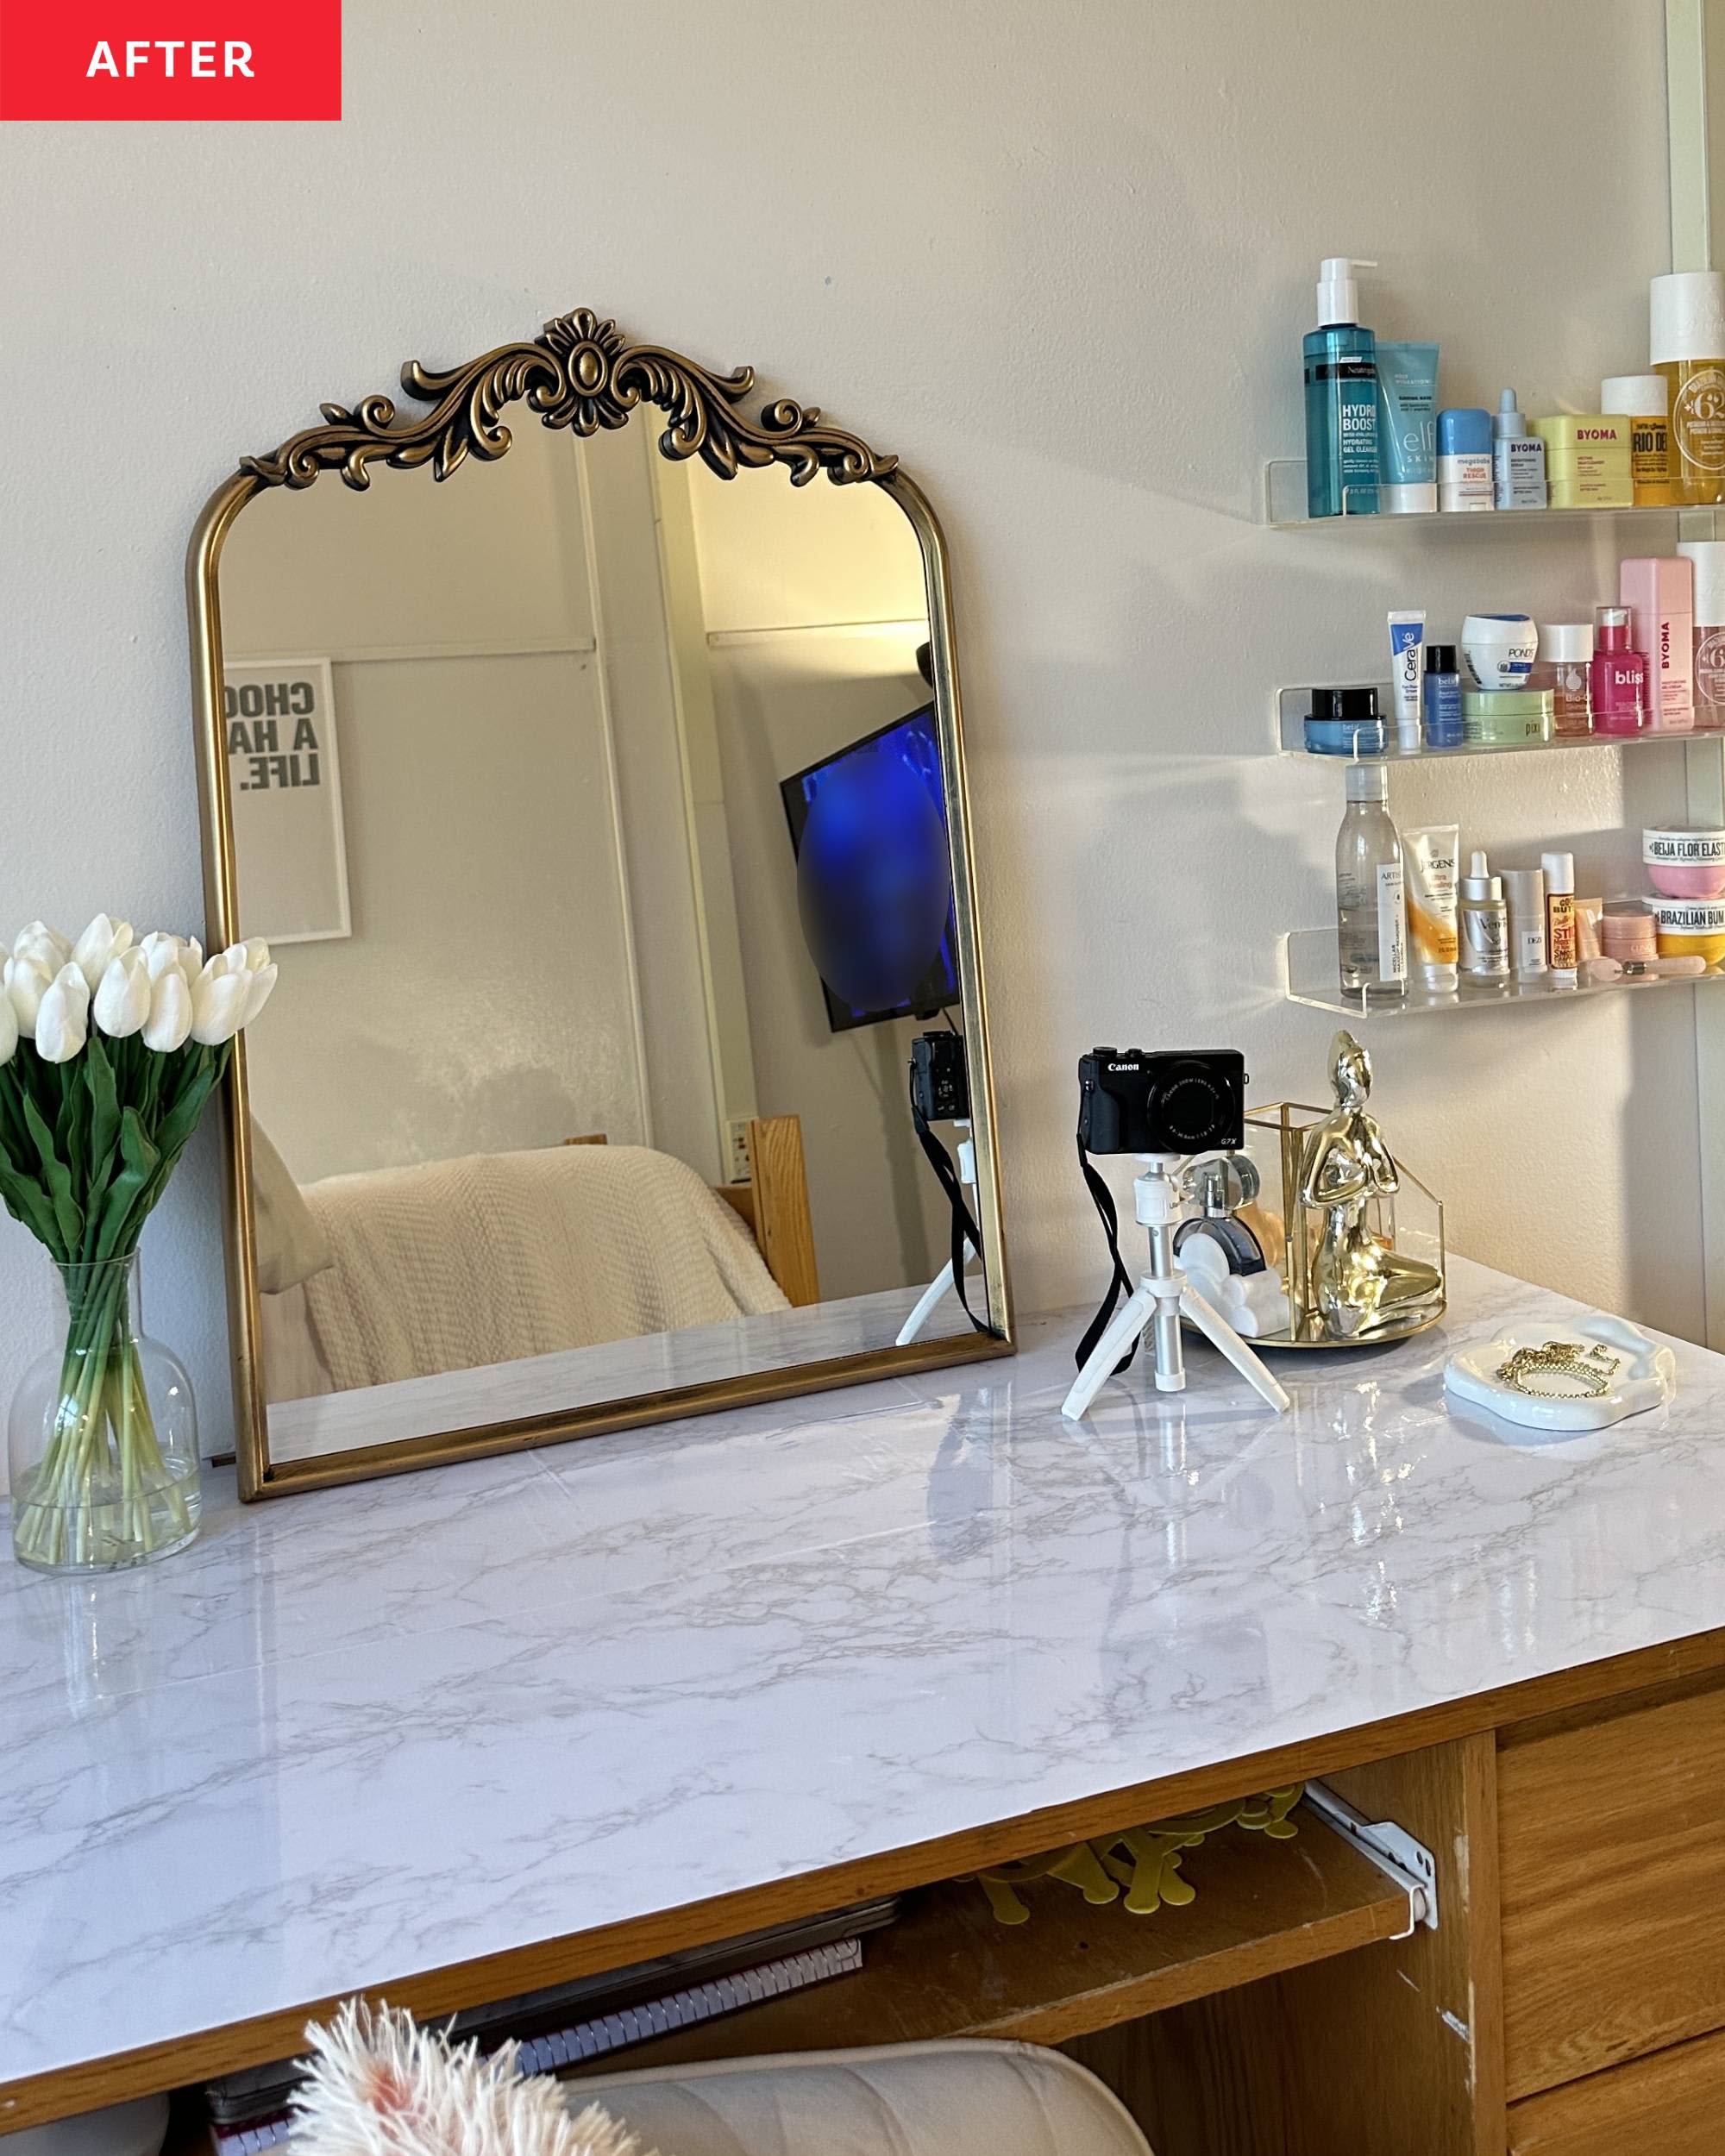 How to organize and decorate your bedroom vanity? - RIKILOVESRIKI